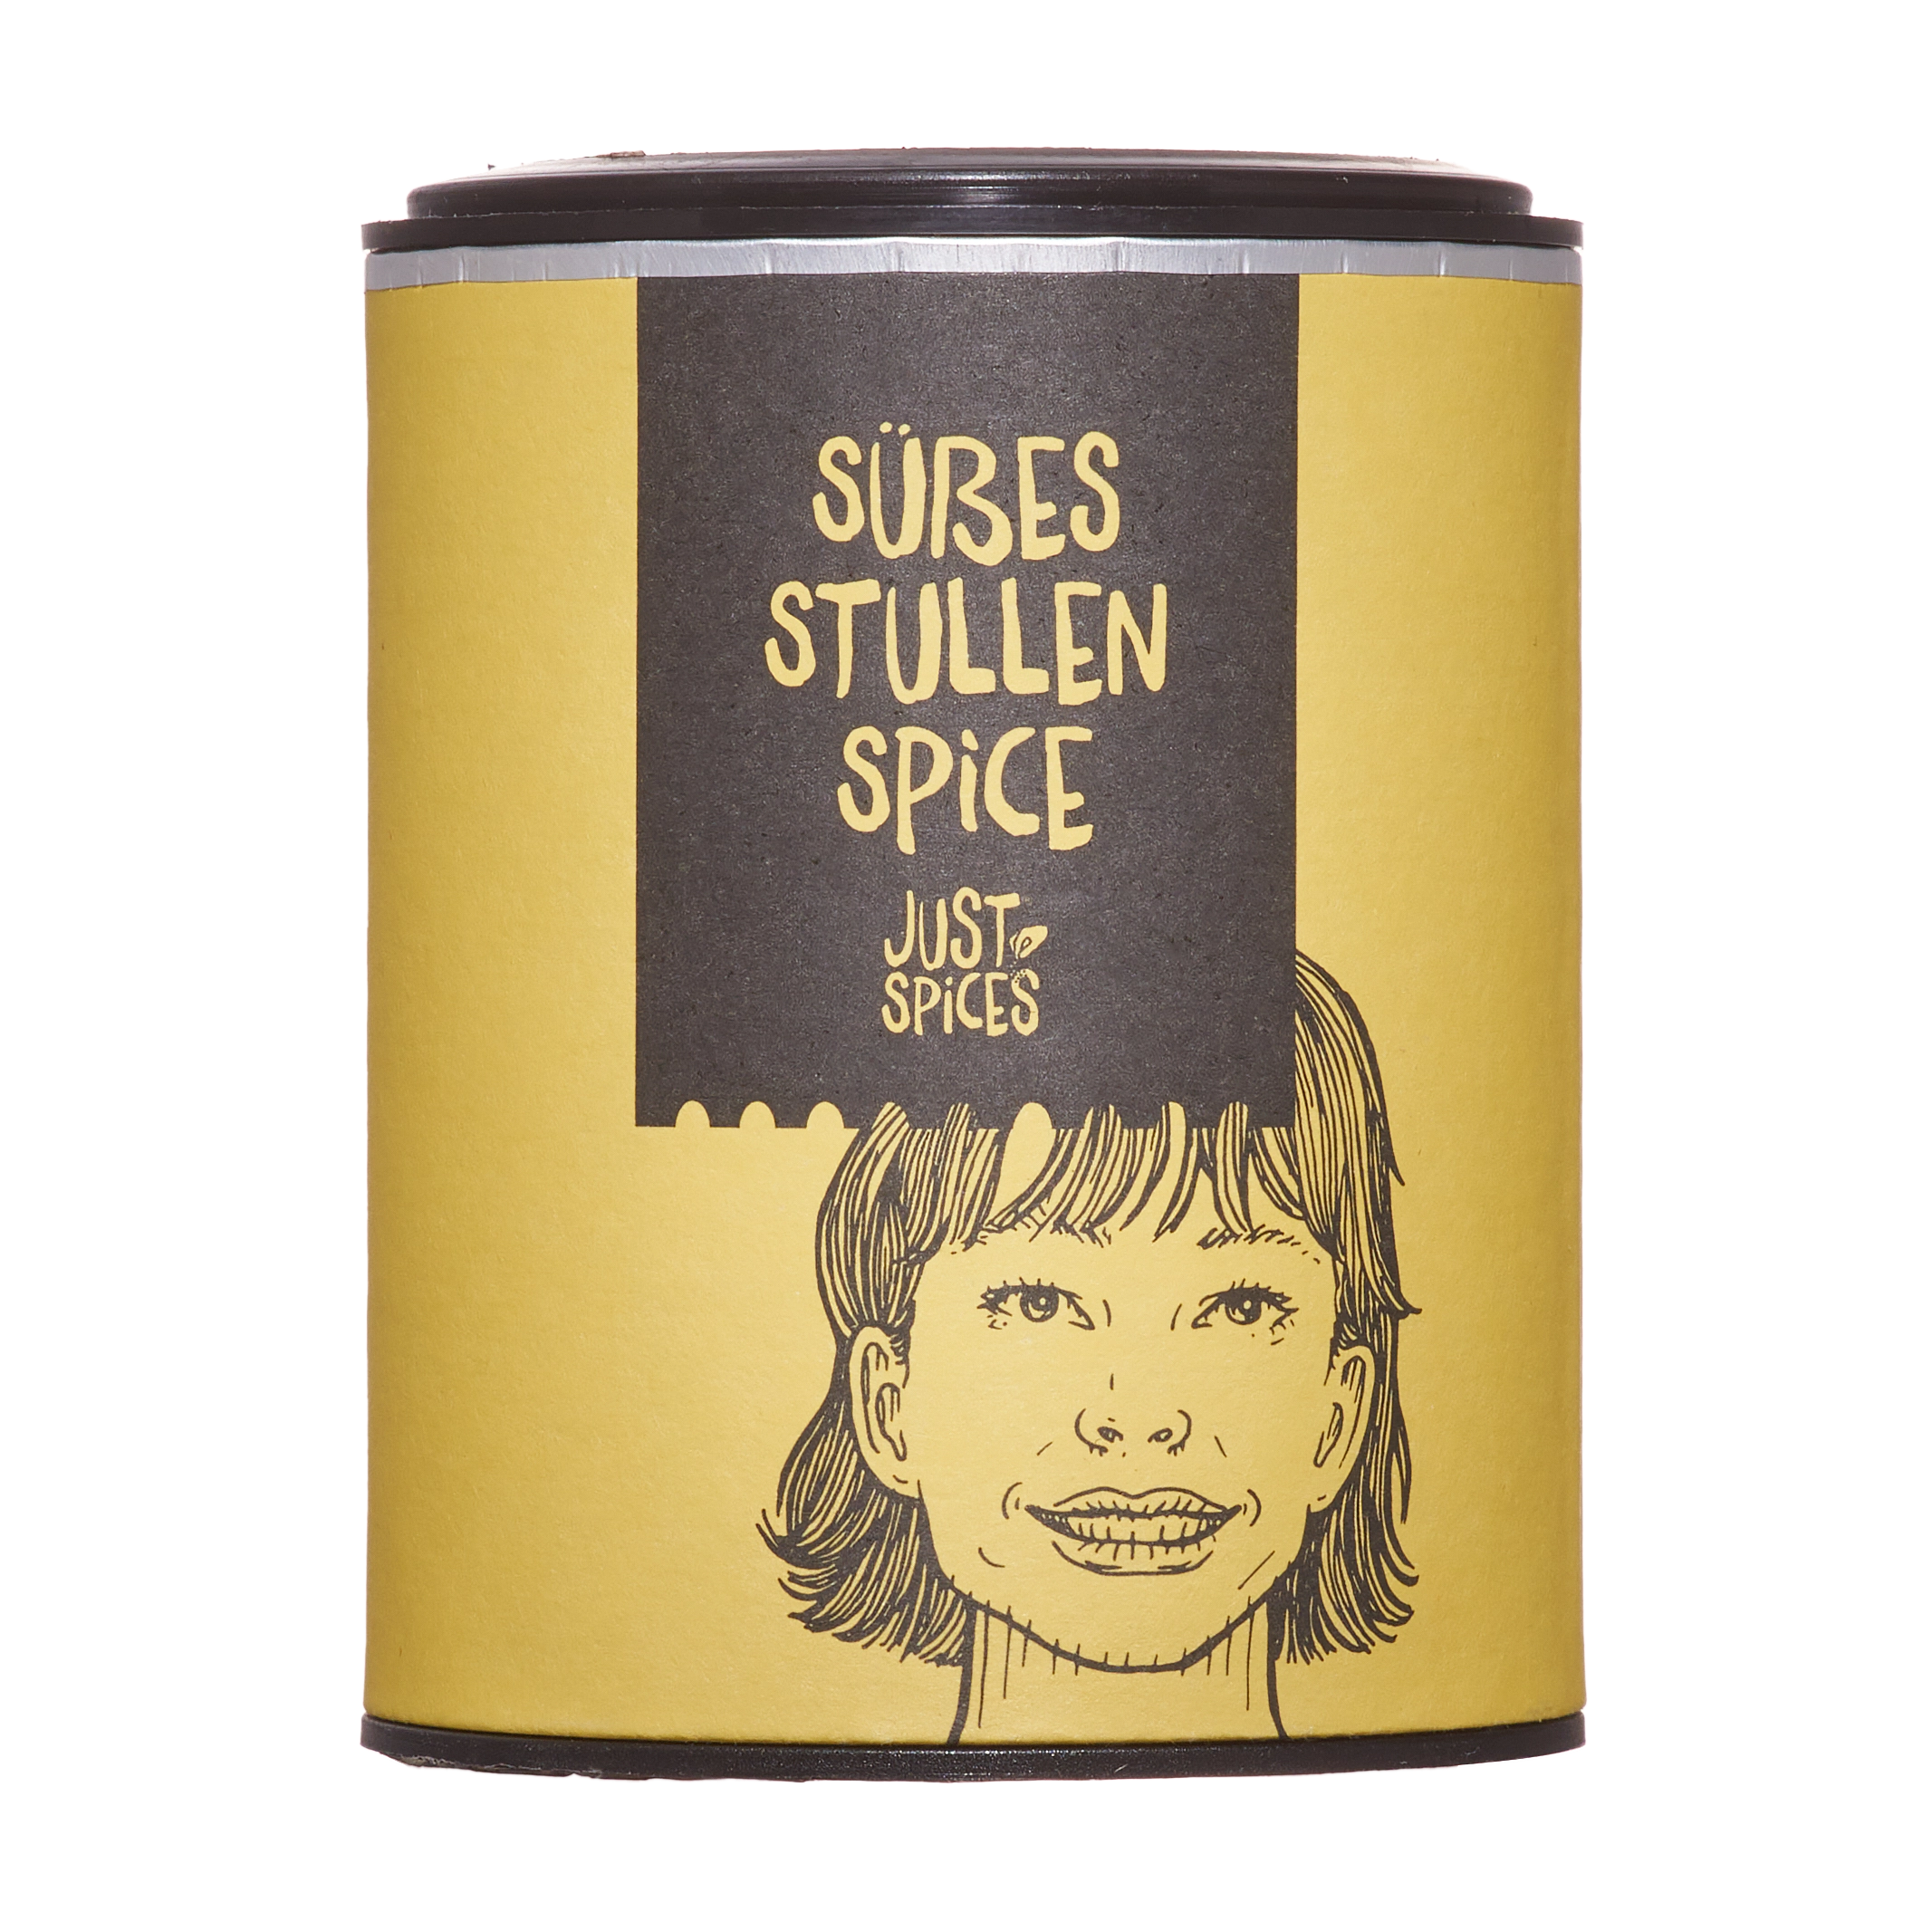 Just Spices Suesses Stullen Spice 1